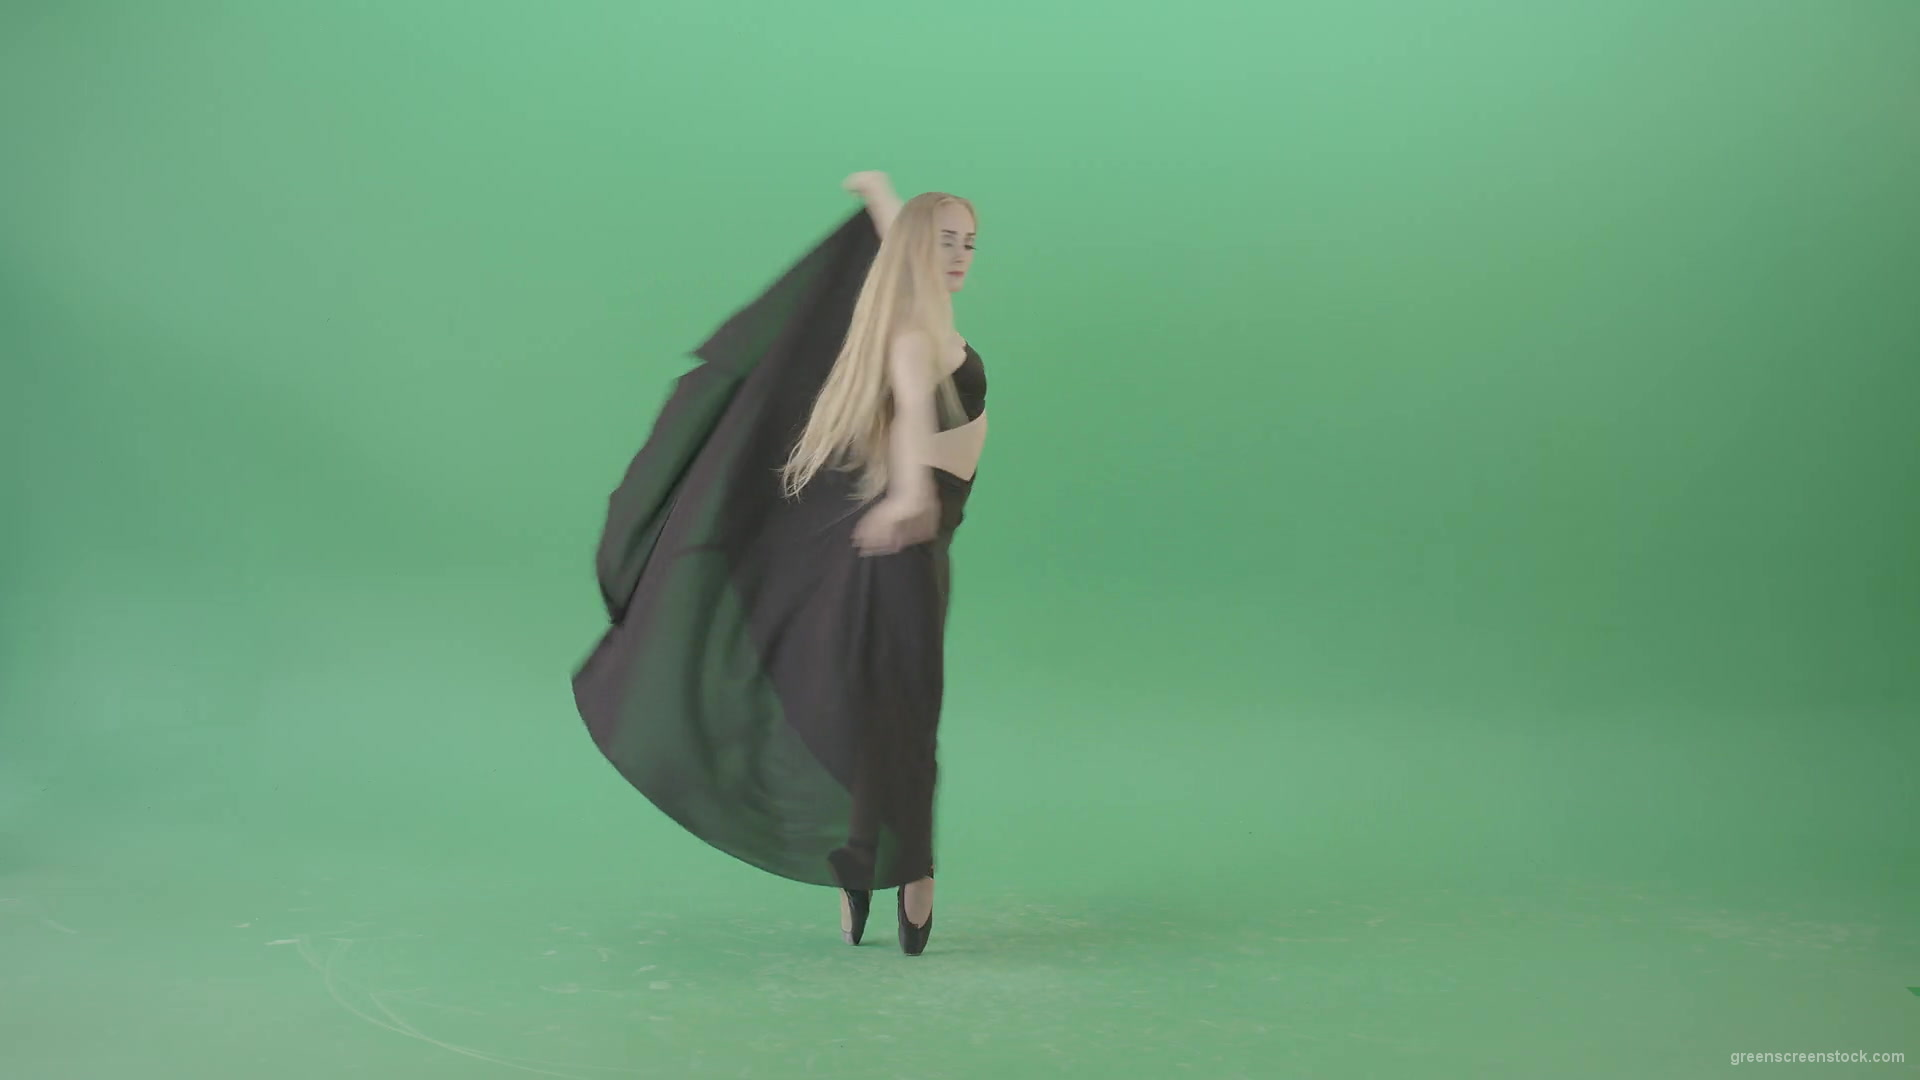 Spinning-isolated-on-green-screen-ballet-young-woman-ballerin-in-black-costume-4K-Video-Footage-1920_007 Green Screen Stock